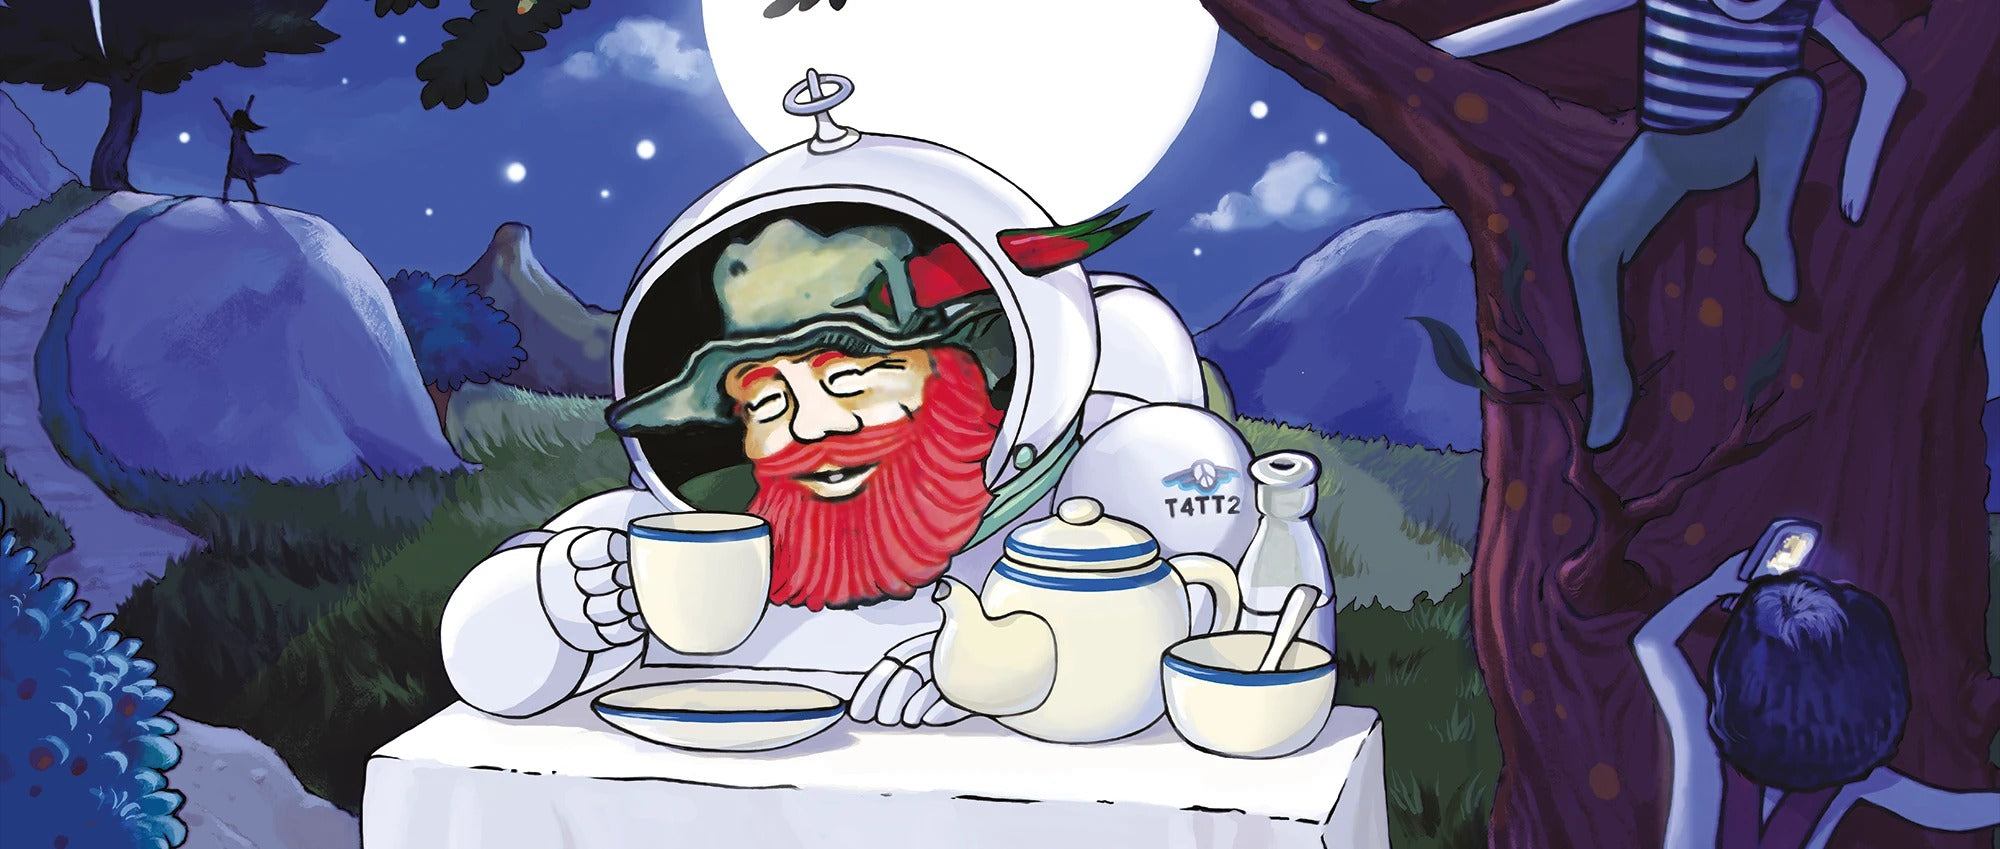 Red beard man in a space suit